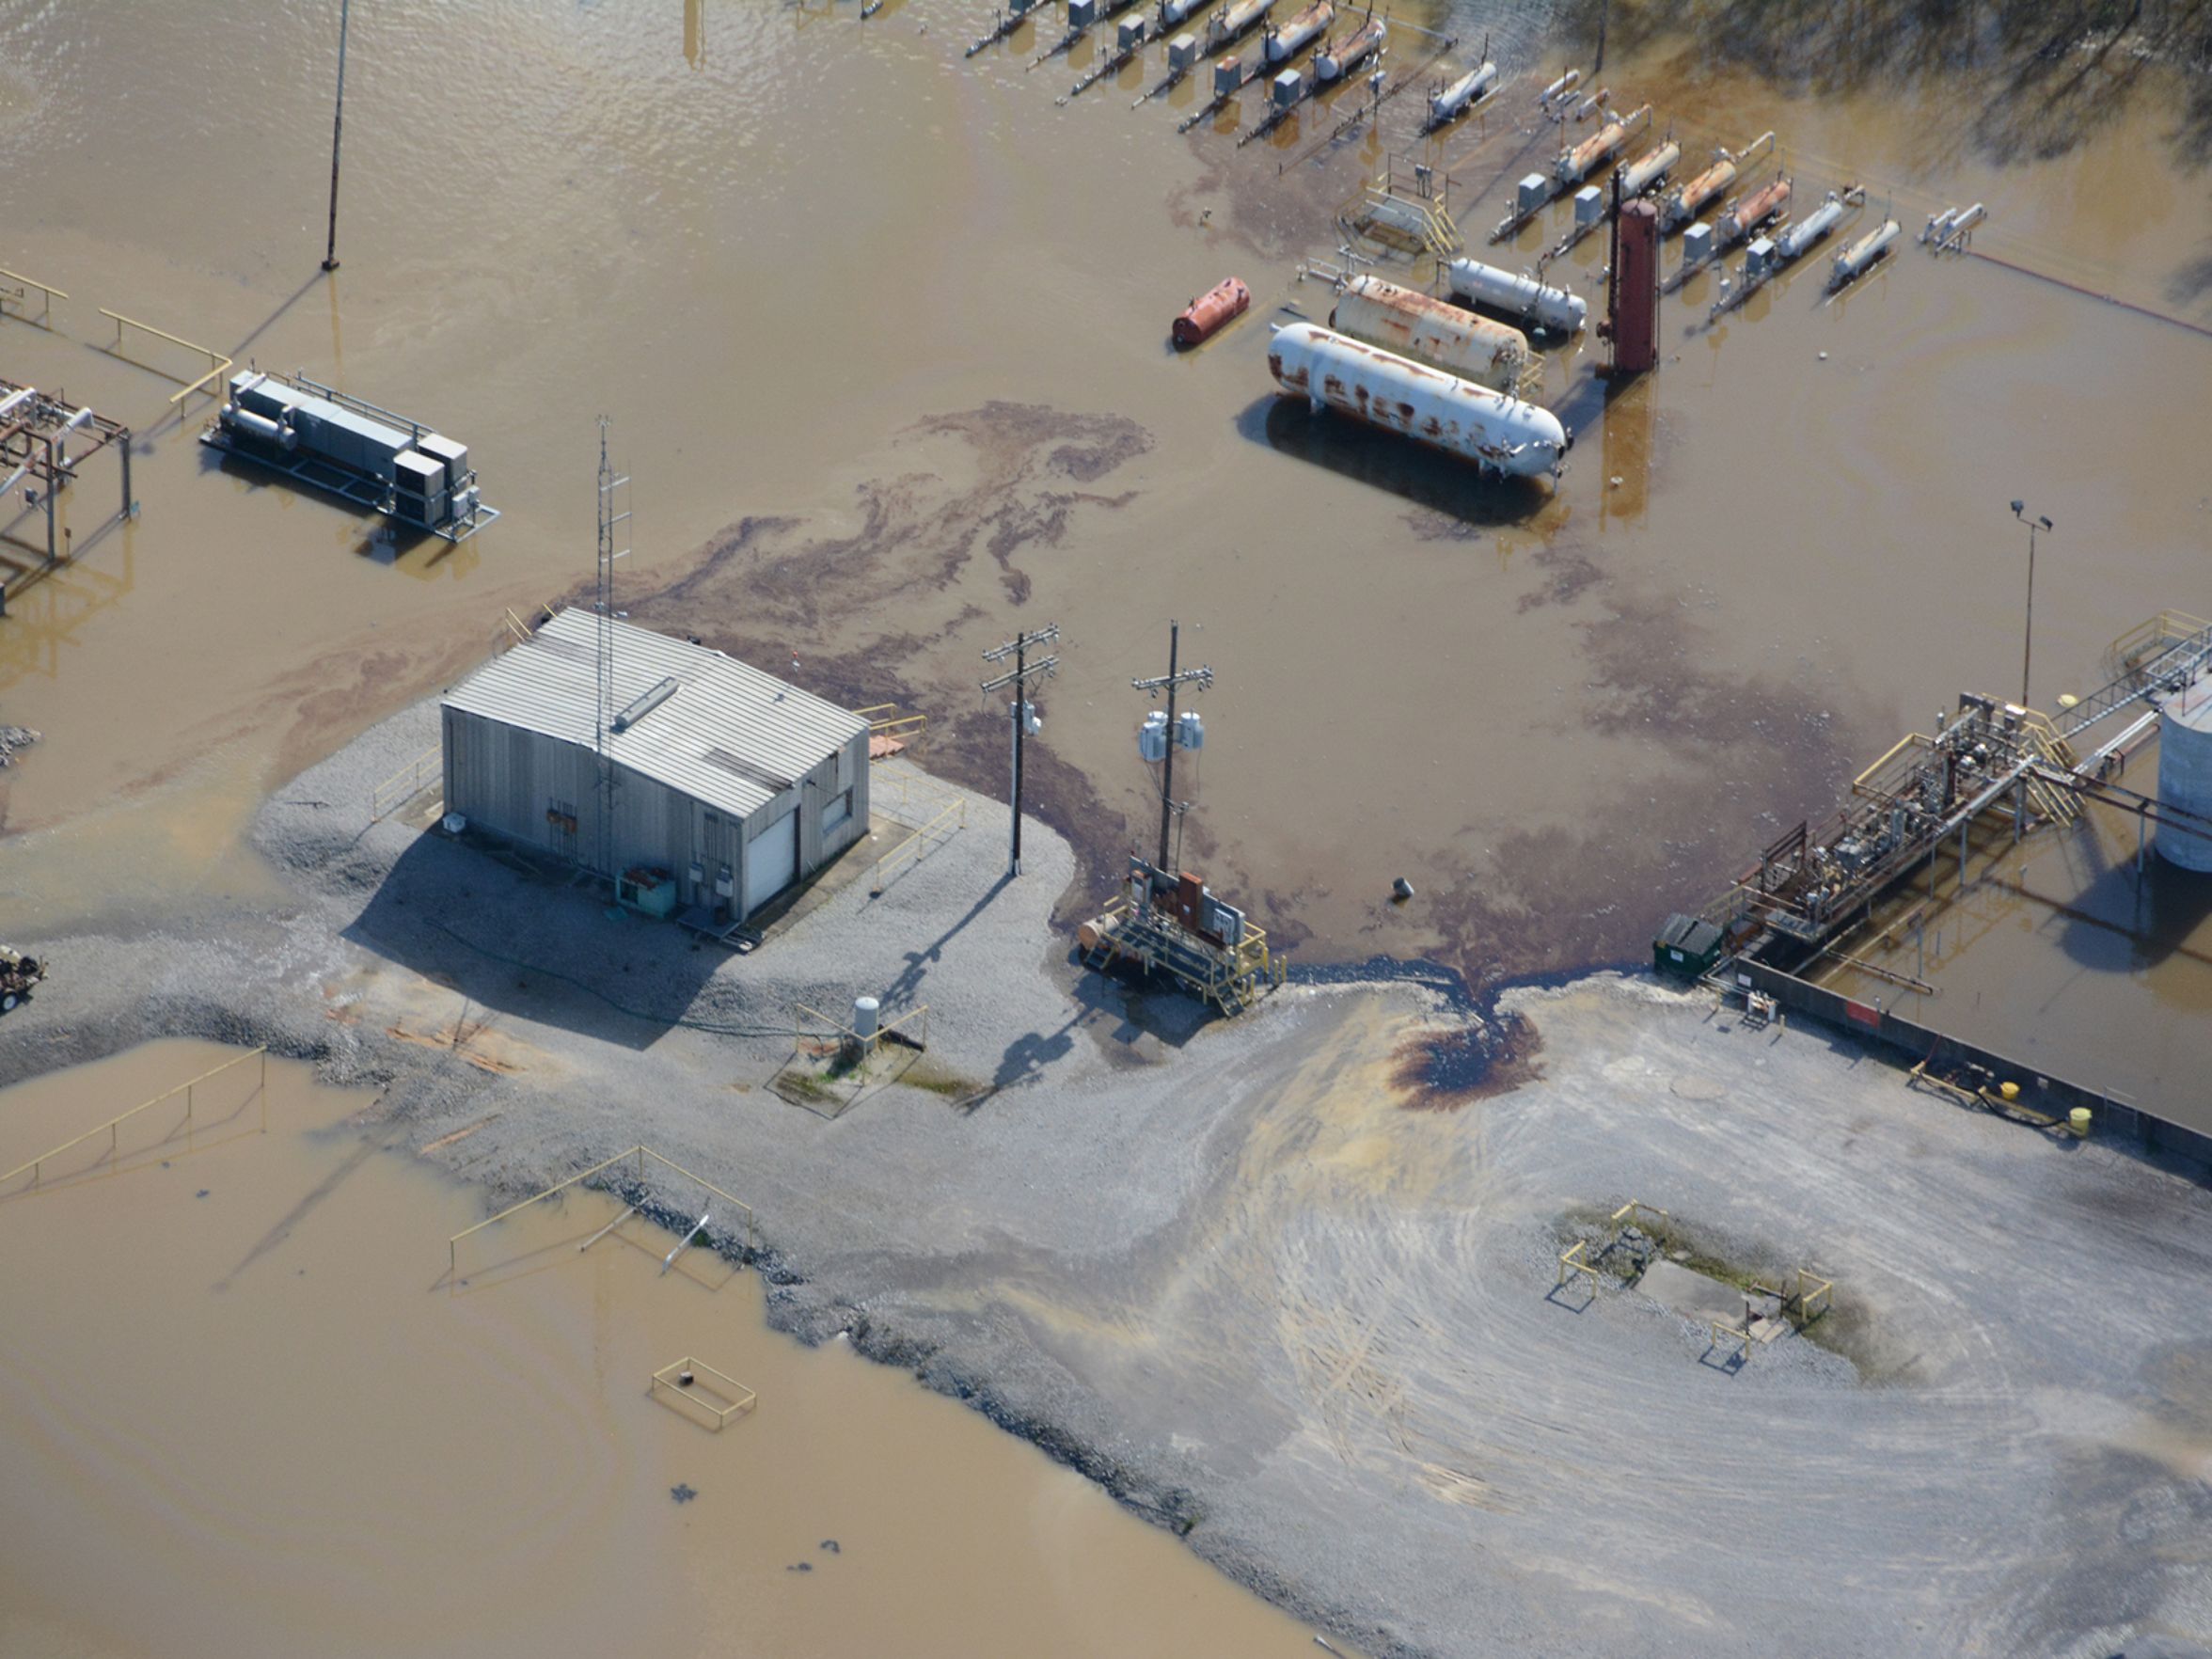 FEMA, Army Corps of Engineers still failing at one of their most basic missions